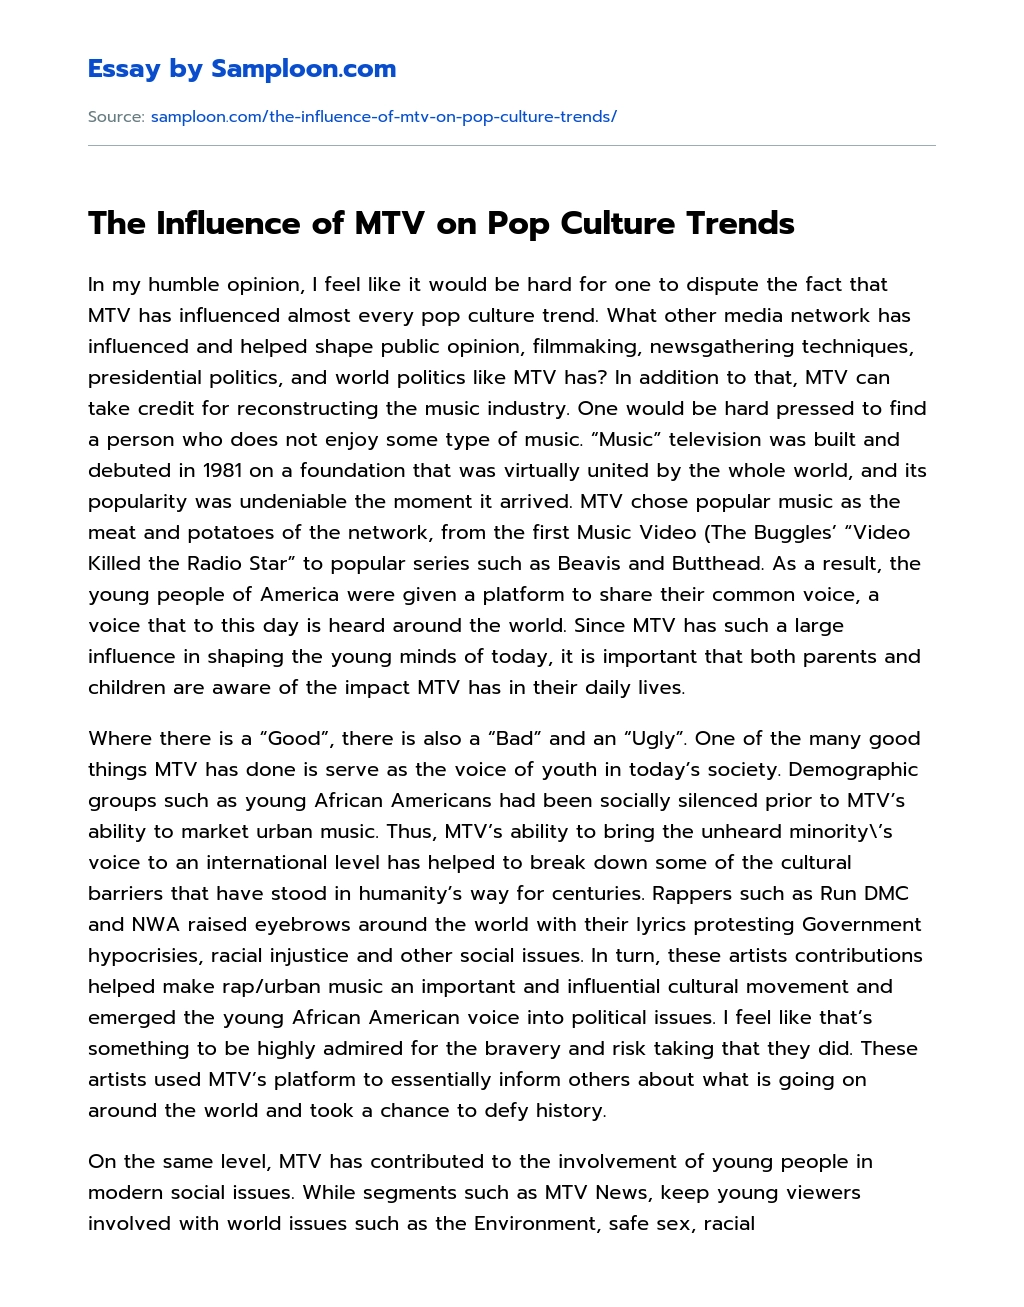 The Influence of MTV on Pop Culture Trends Analytical Essay essay